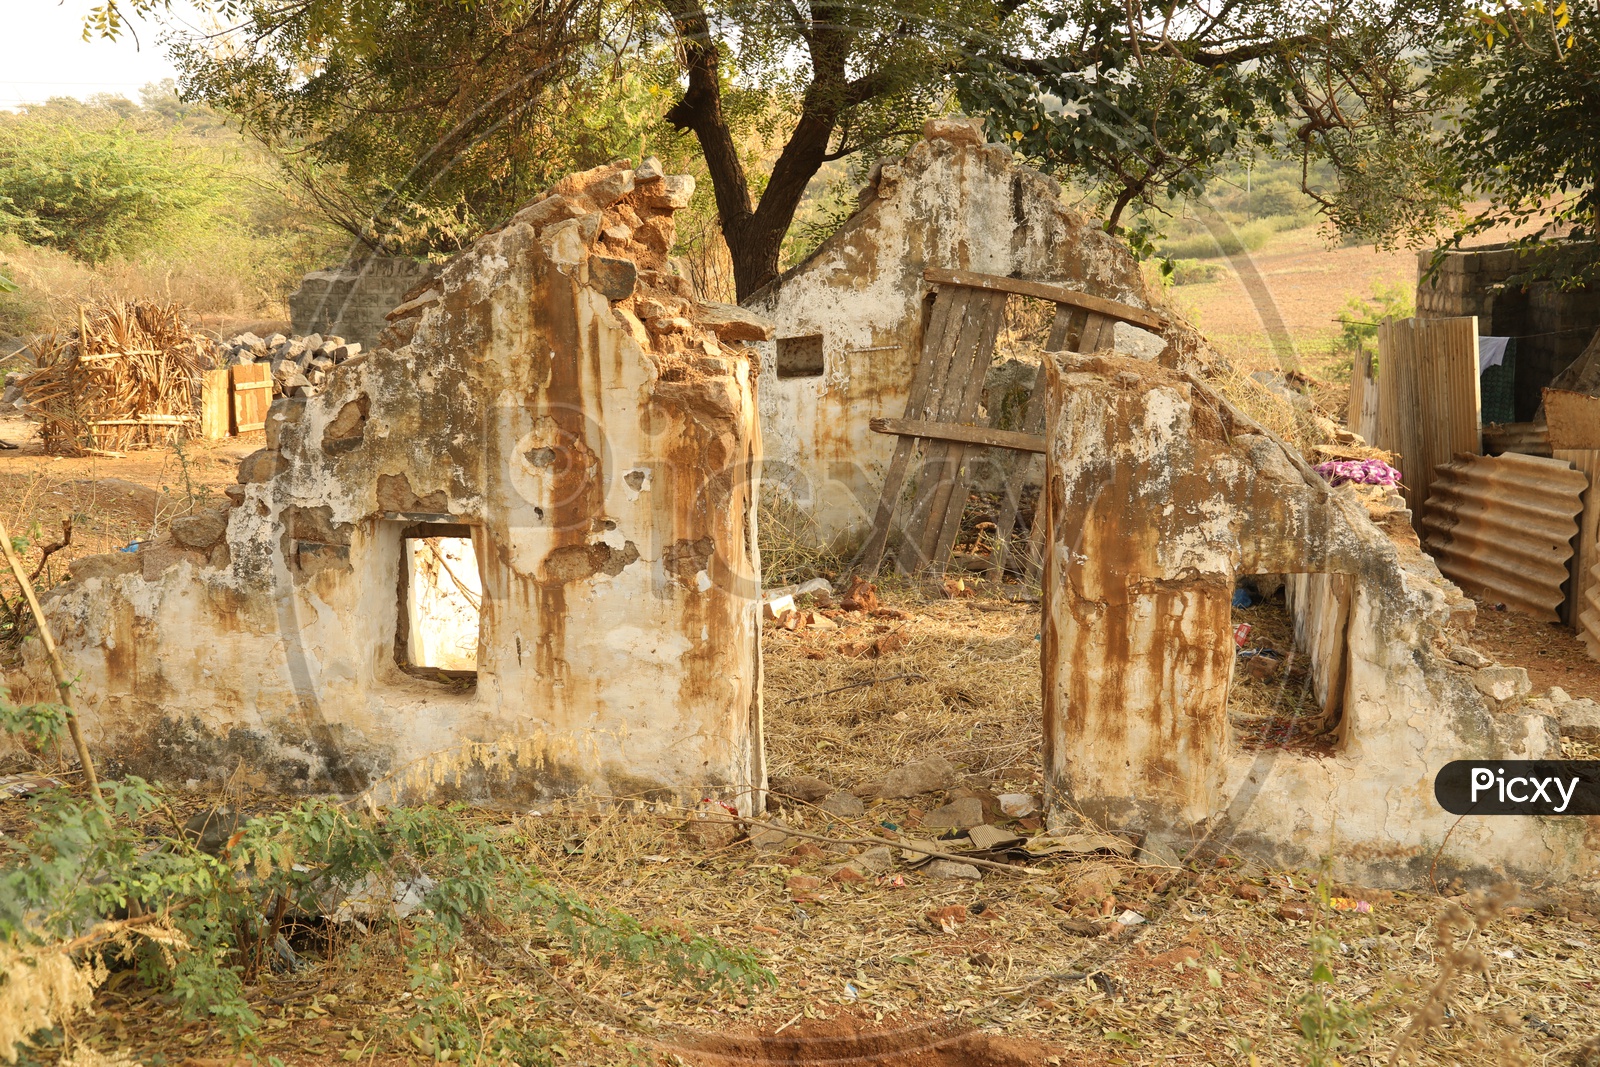 An abandoned old house in an Indian village